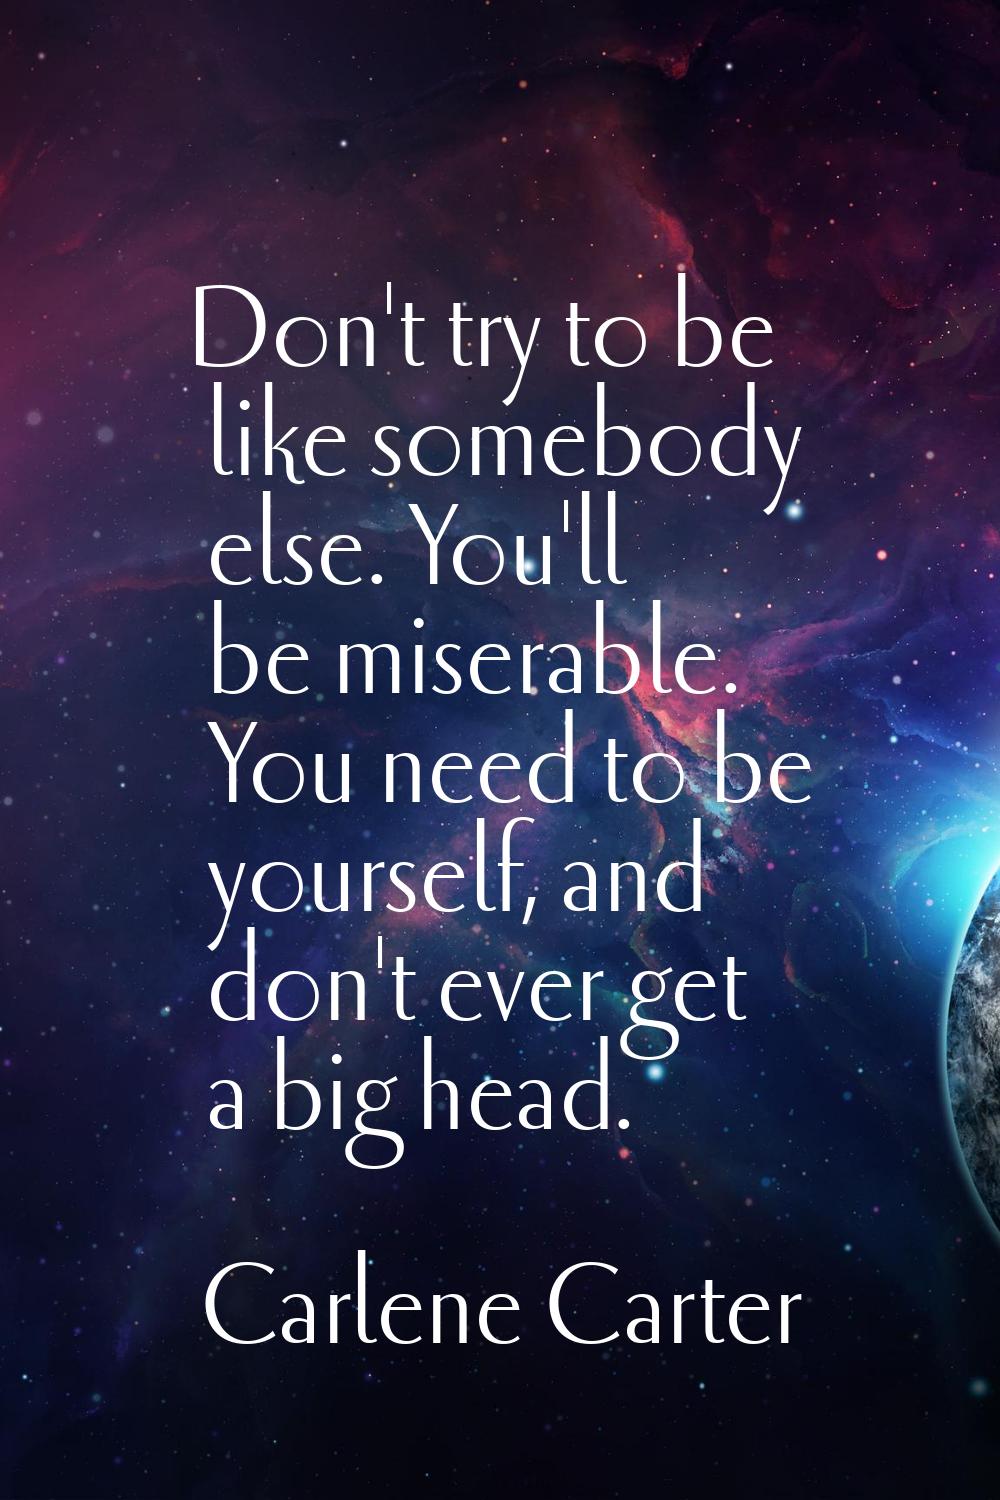 Don't try to be like somebody else. You'll be miserable. You need to be yourself, and don't ever ge